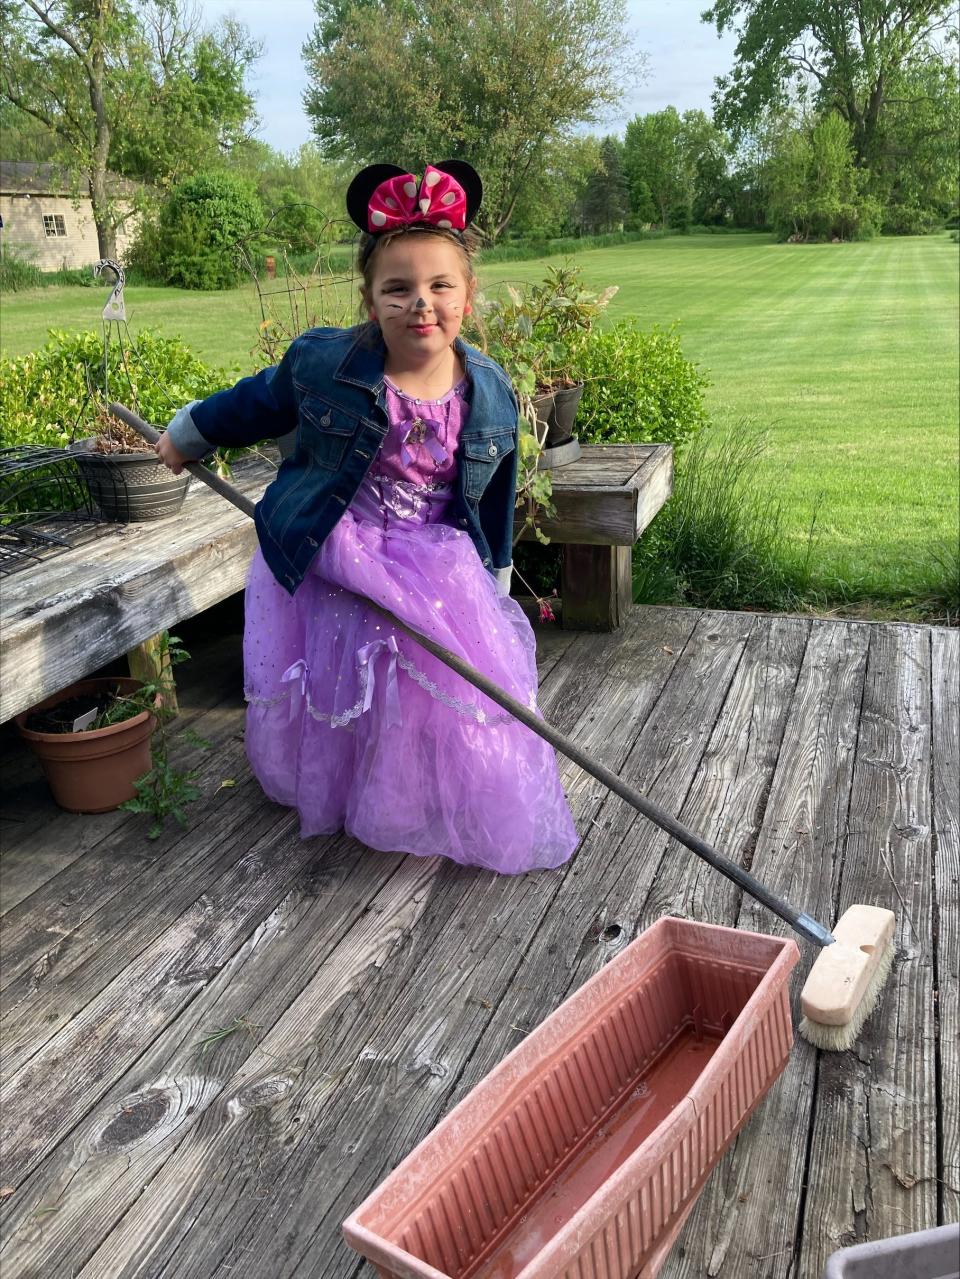 Sophia Faith Berry loves to dress up. She often goes over to her neighbor's house to bring her food, get her mail, visit and even helps clean up. Here, Sofia is in her first dress and Minnie Mouse ears. She just wanted to help her dear friend and neighbor. Provided by Jodi Berry